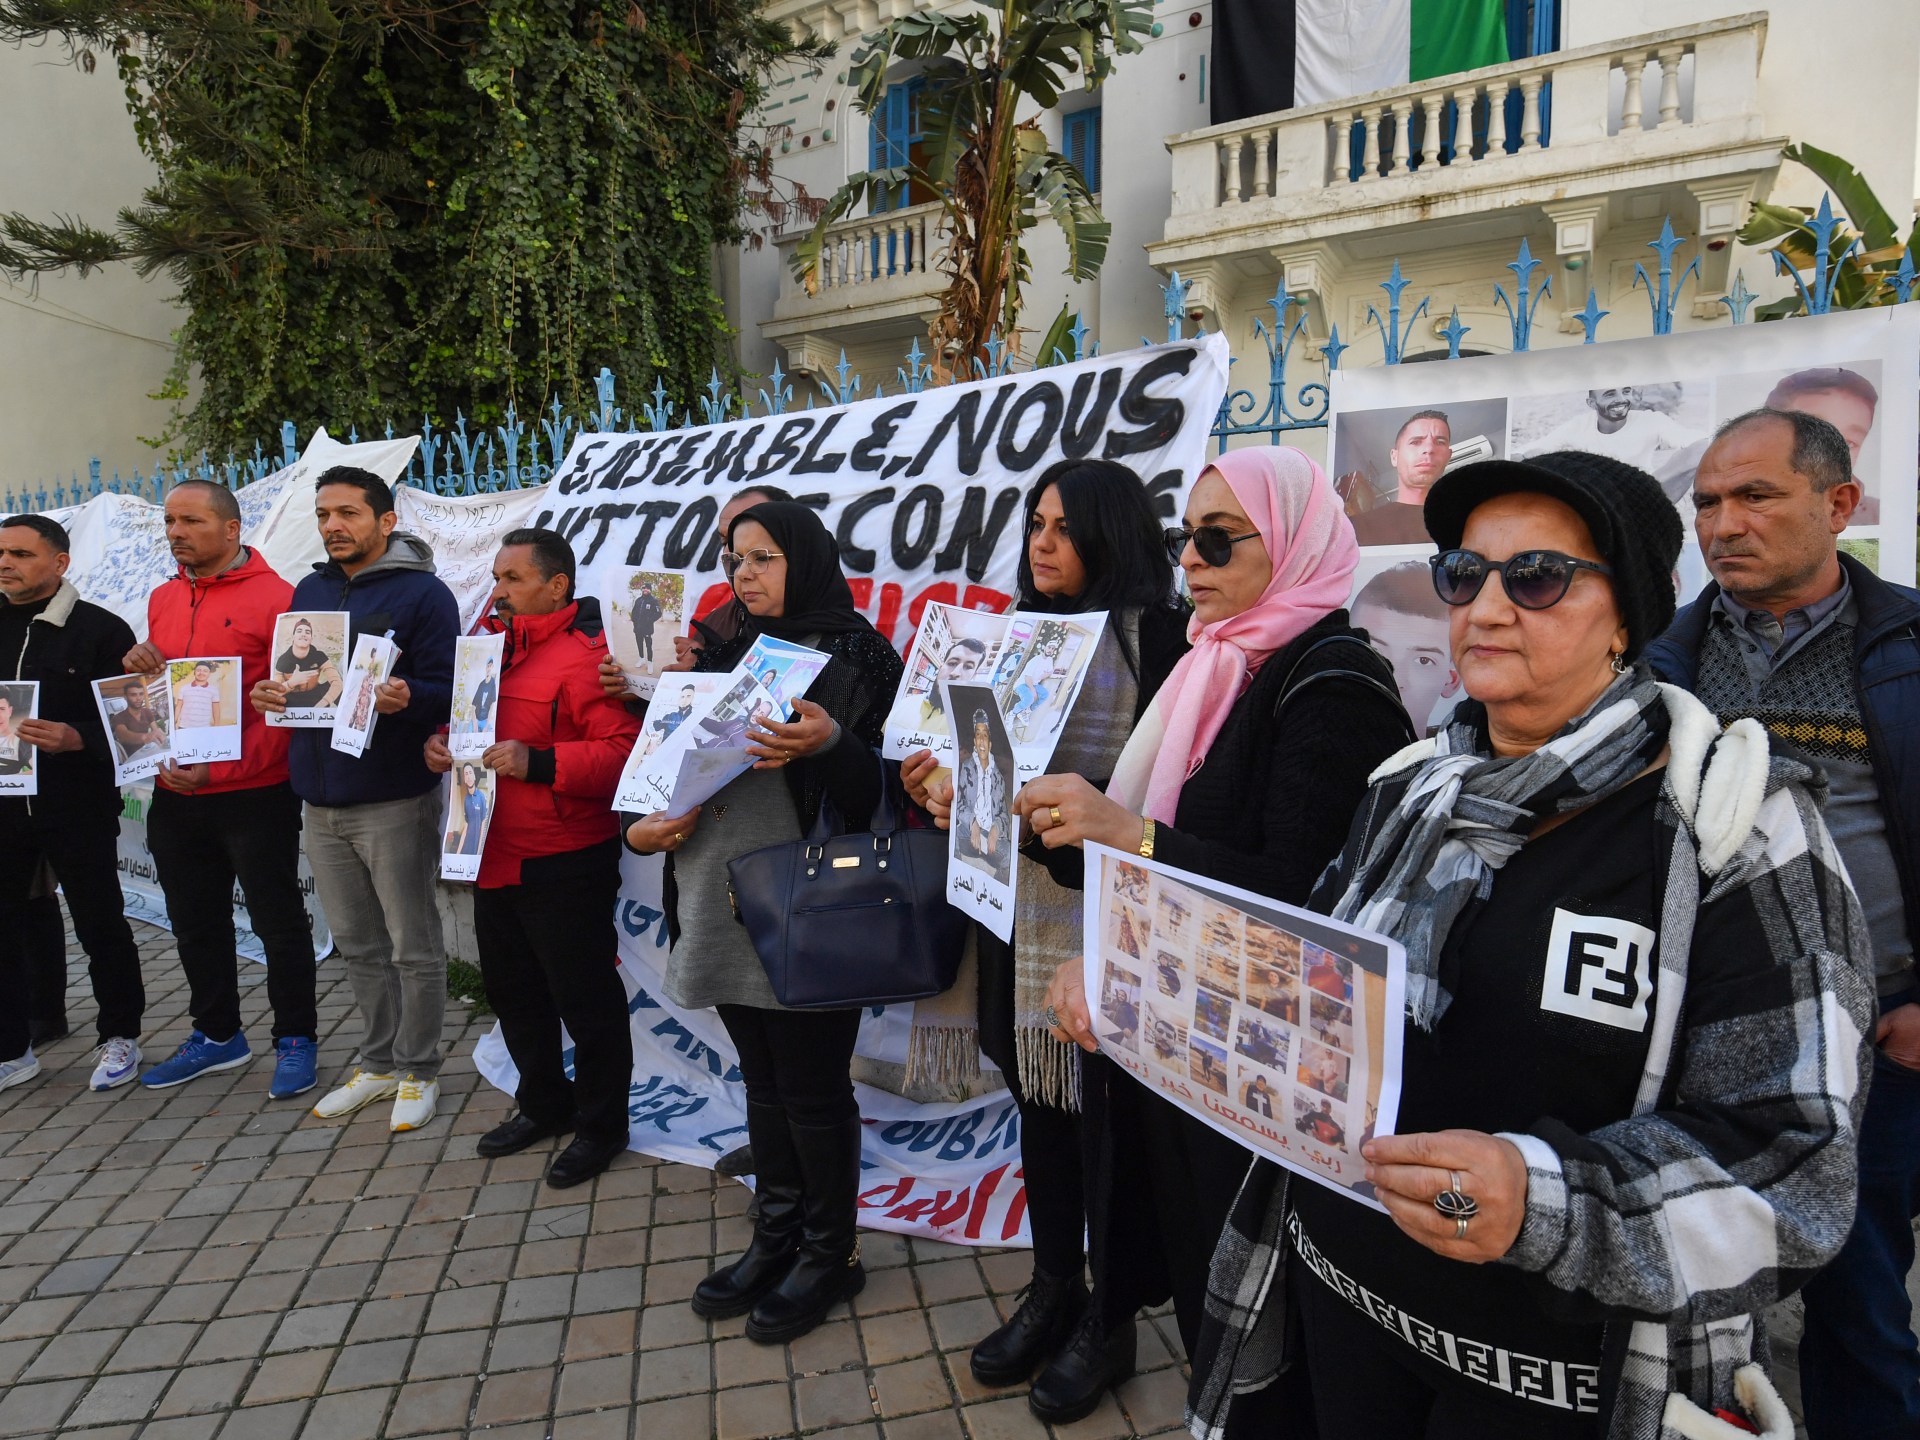 In Tunisia, the families of El Hancha’s disappeared fight to find them | Migration News